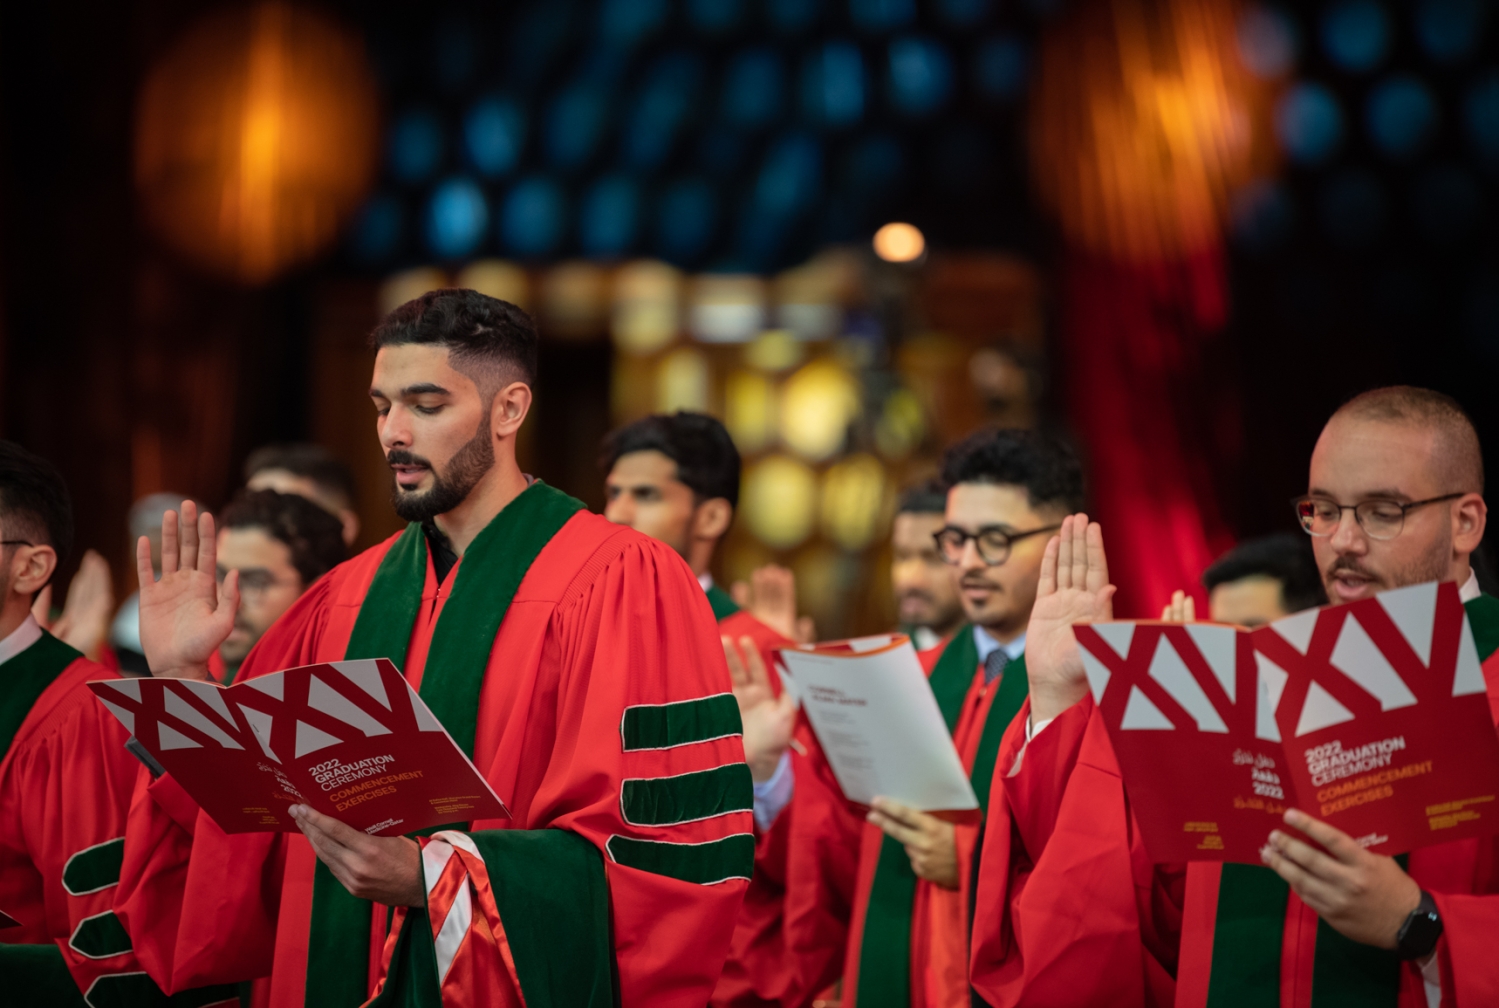 WCM-Q students read the Hippocratic oath during their commencement ceremony.